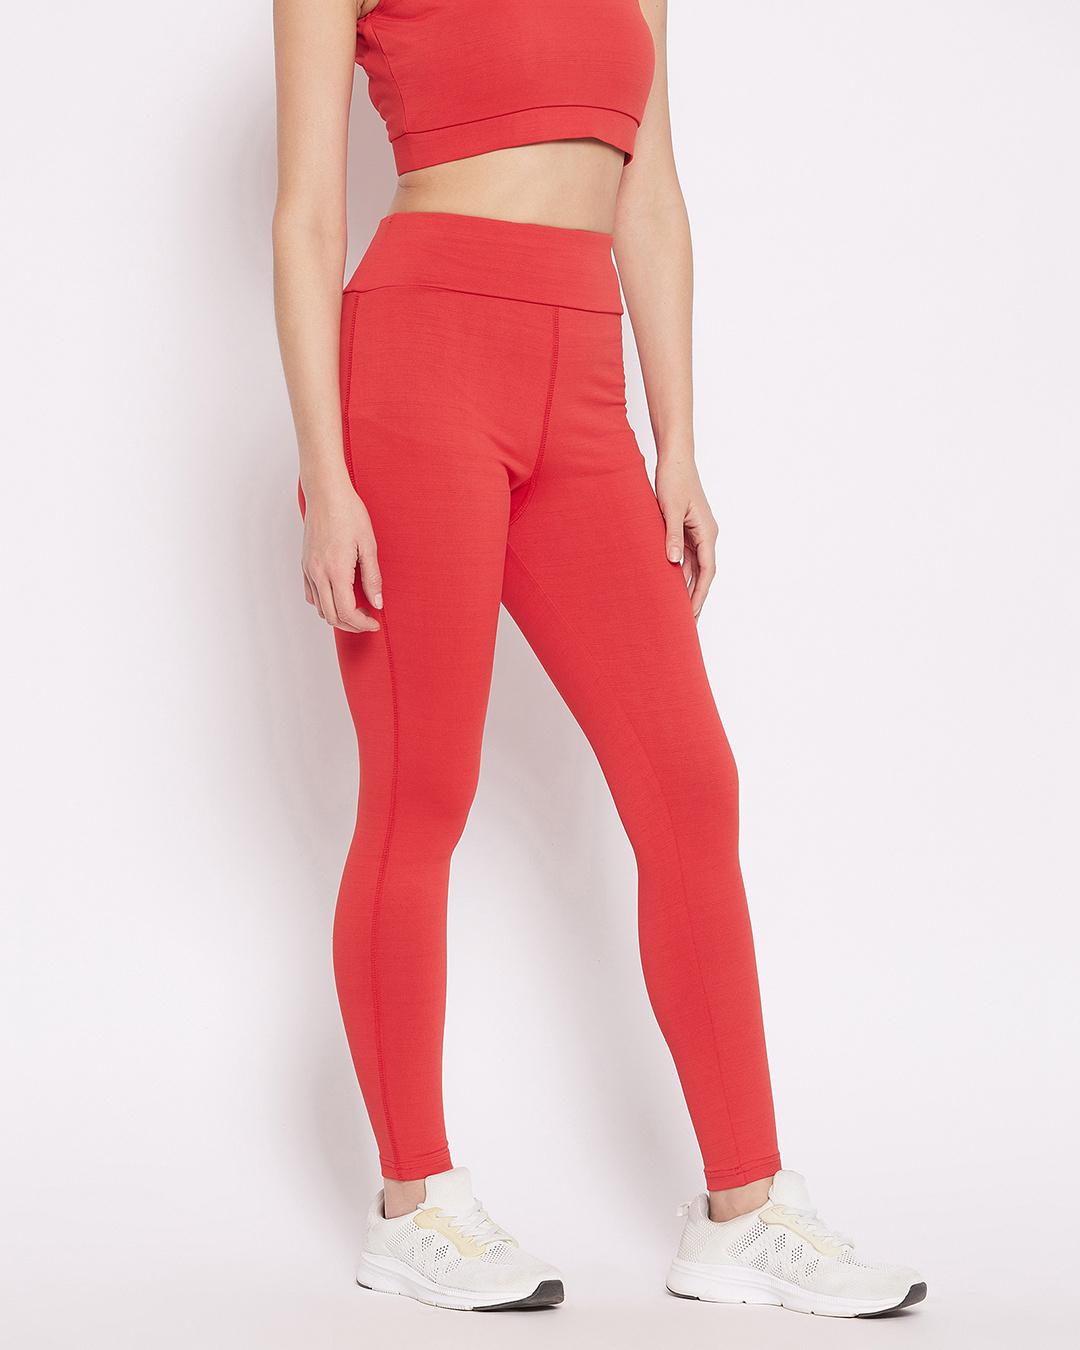 Shop Women's Red High Rise Spandex Tights-Back